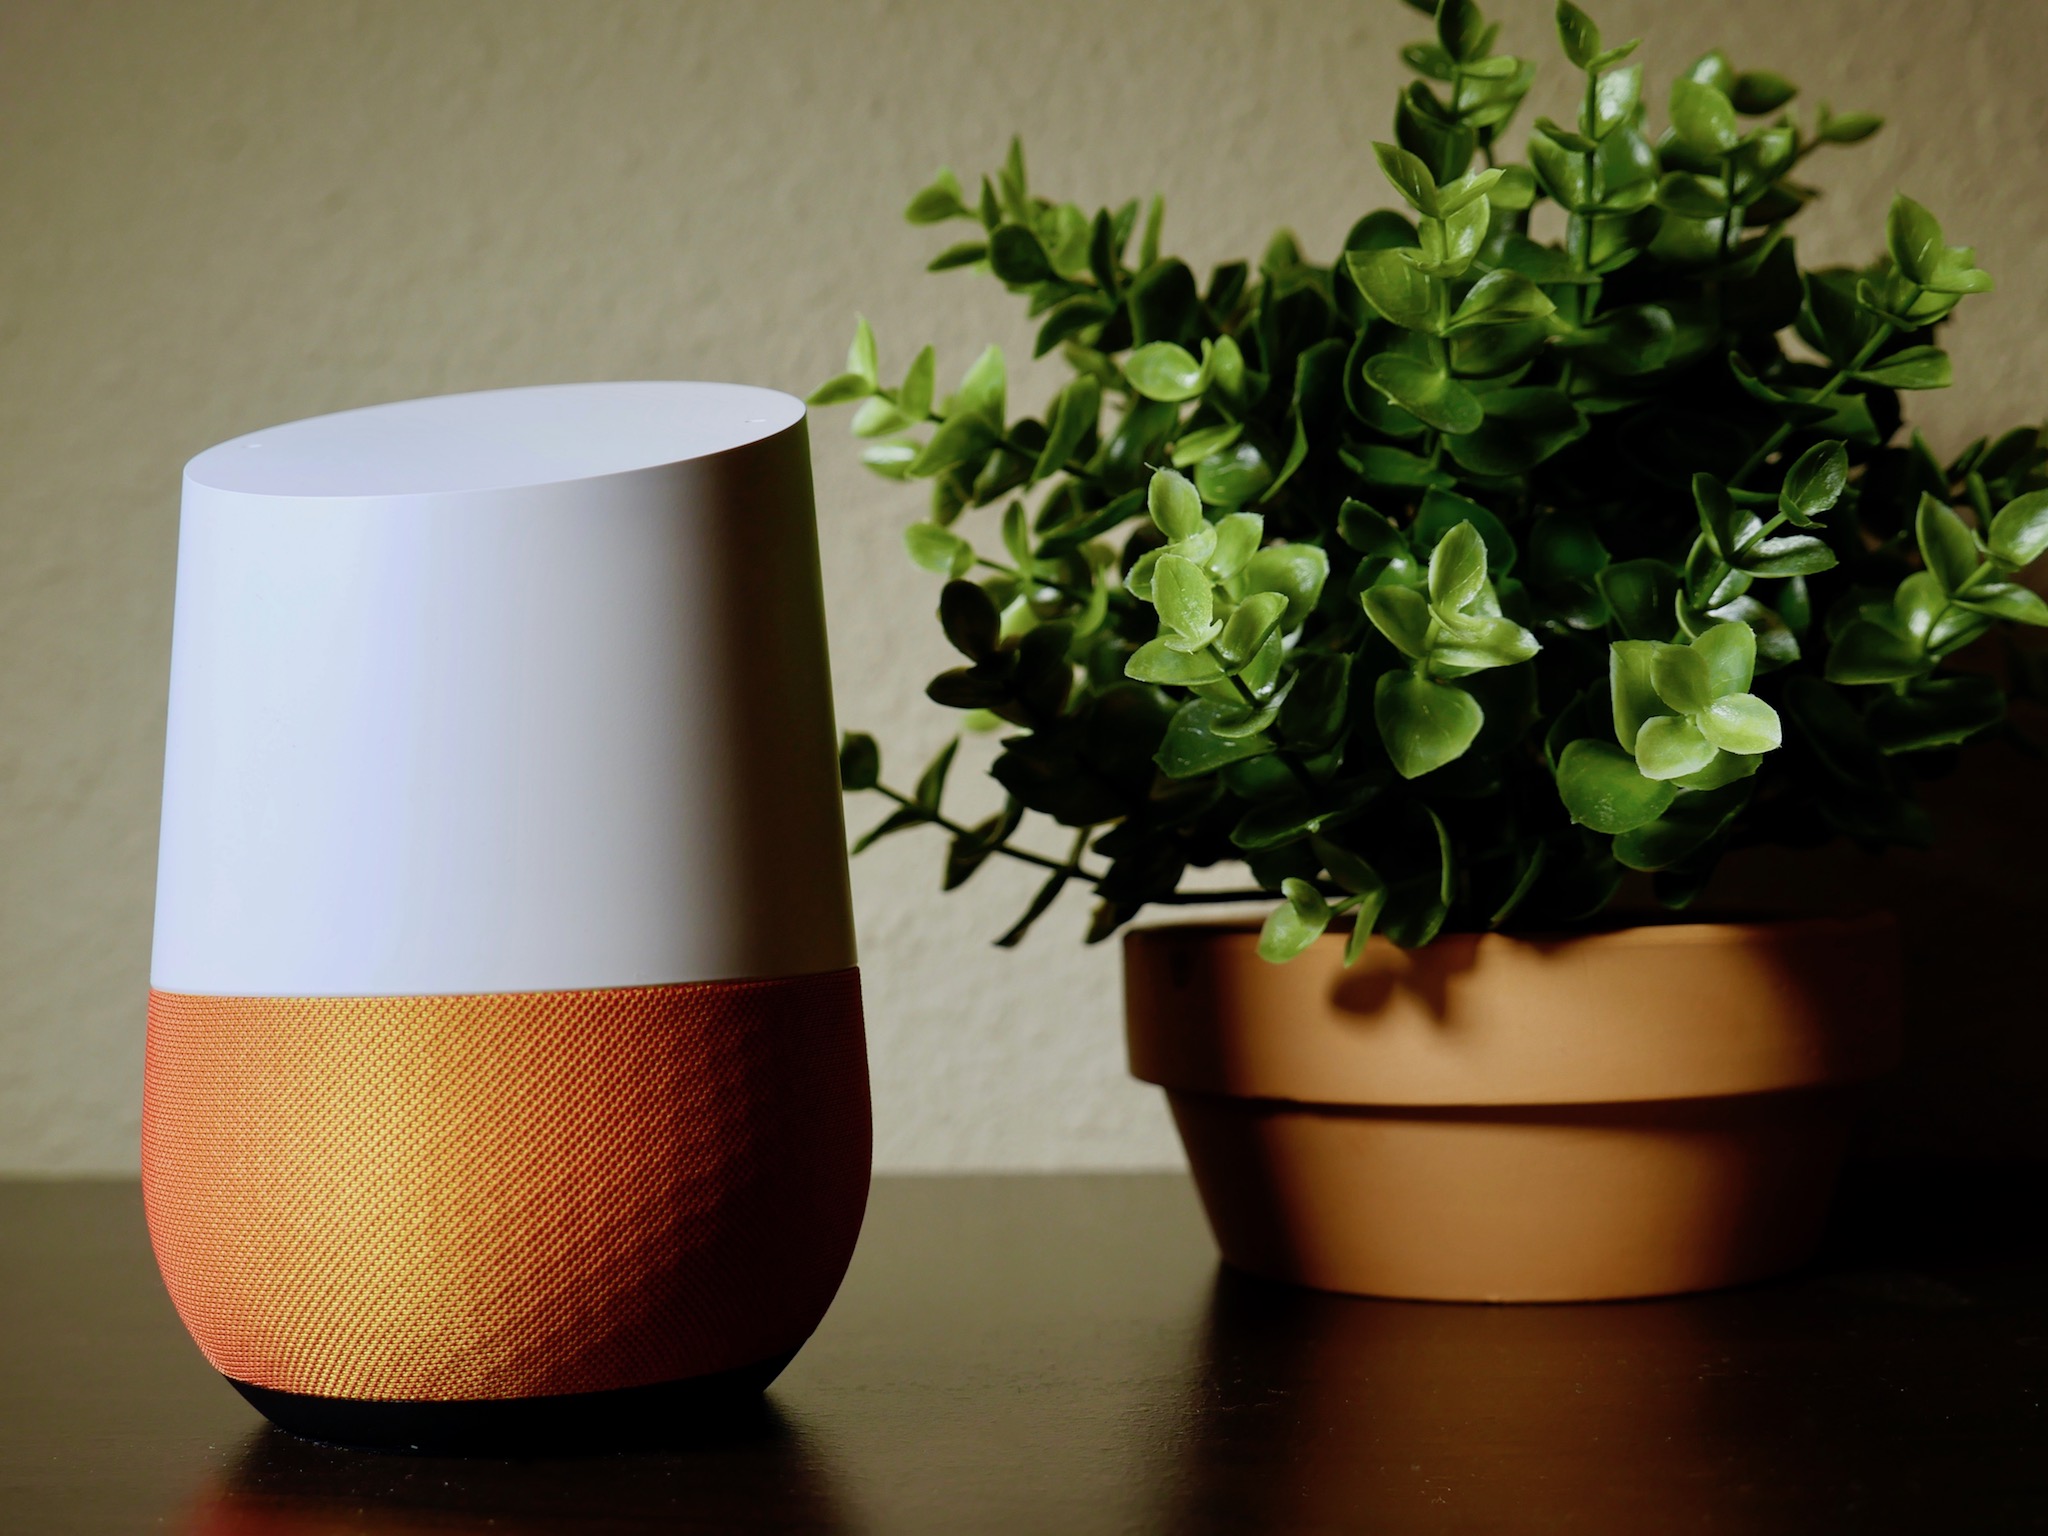 A Google Home smart speaker sits next to a succulent